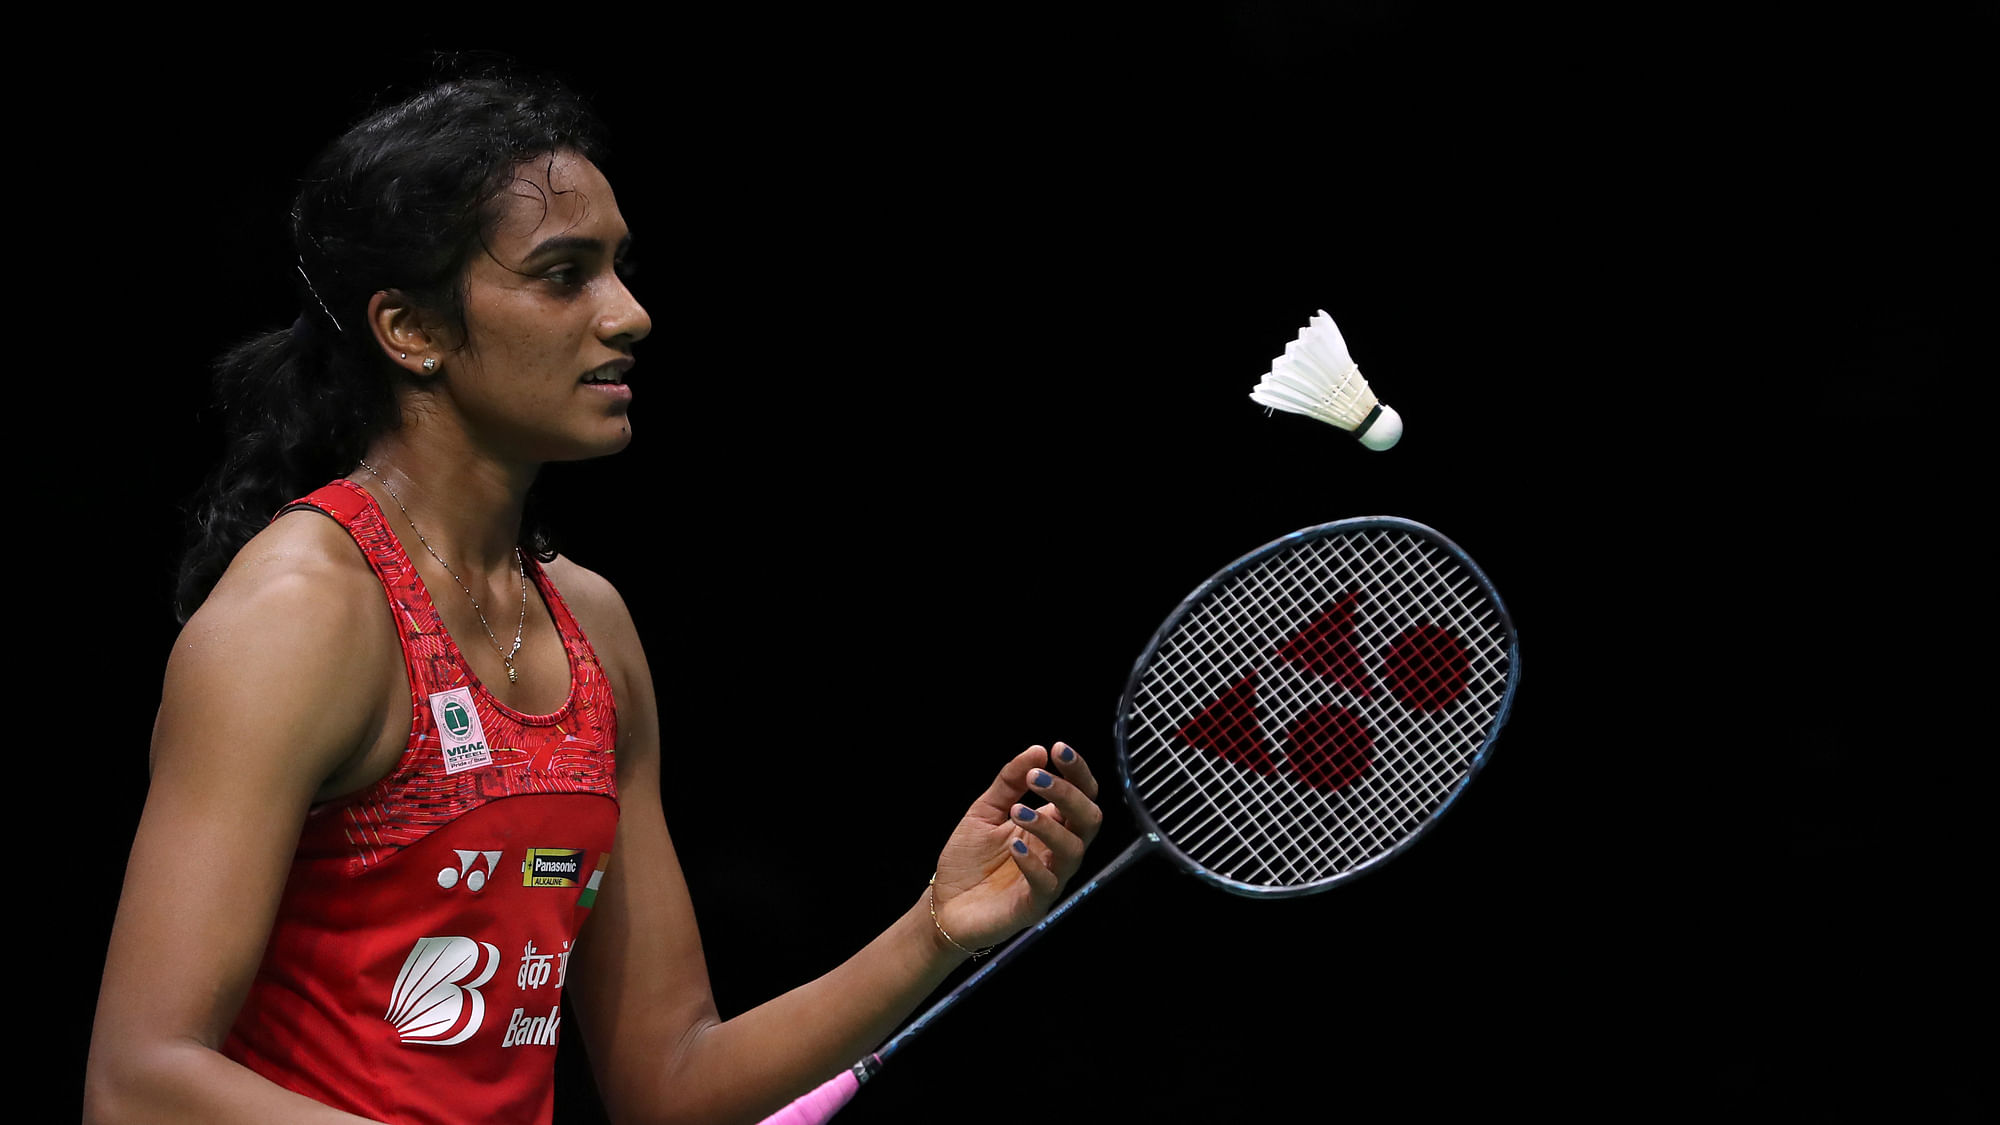 PV Sindhu has entered the quarter-finals of the China Open badminton tournament.